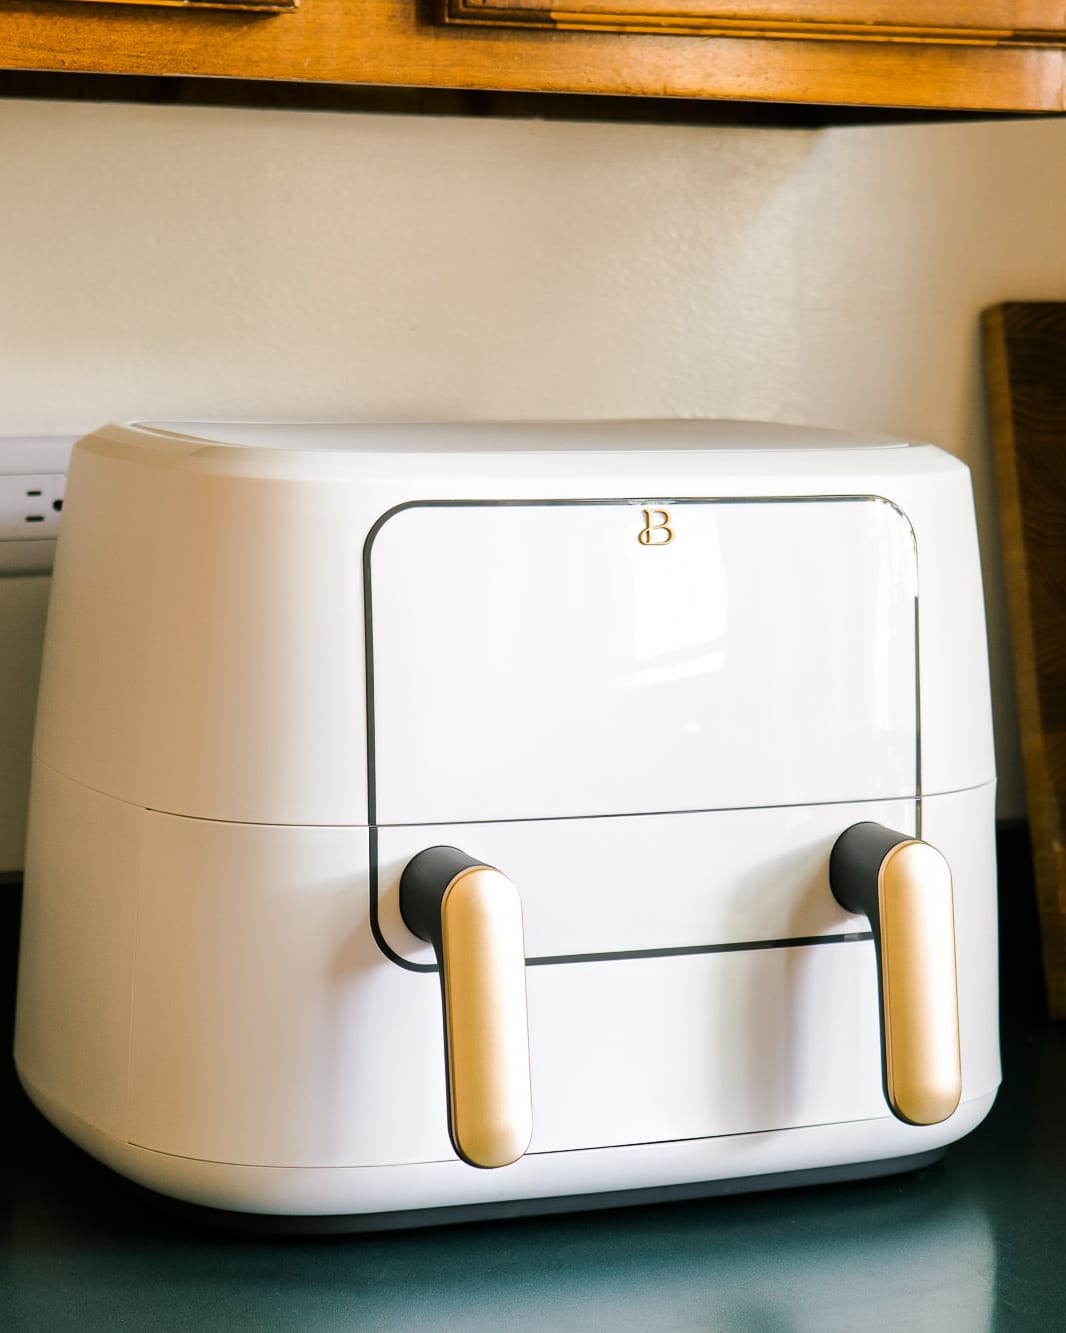 Here's How to Easily Clean Your Air Fryer in Minutes